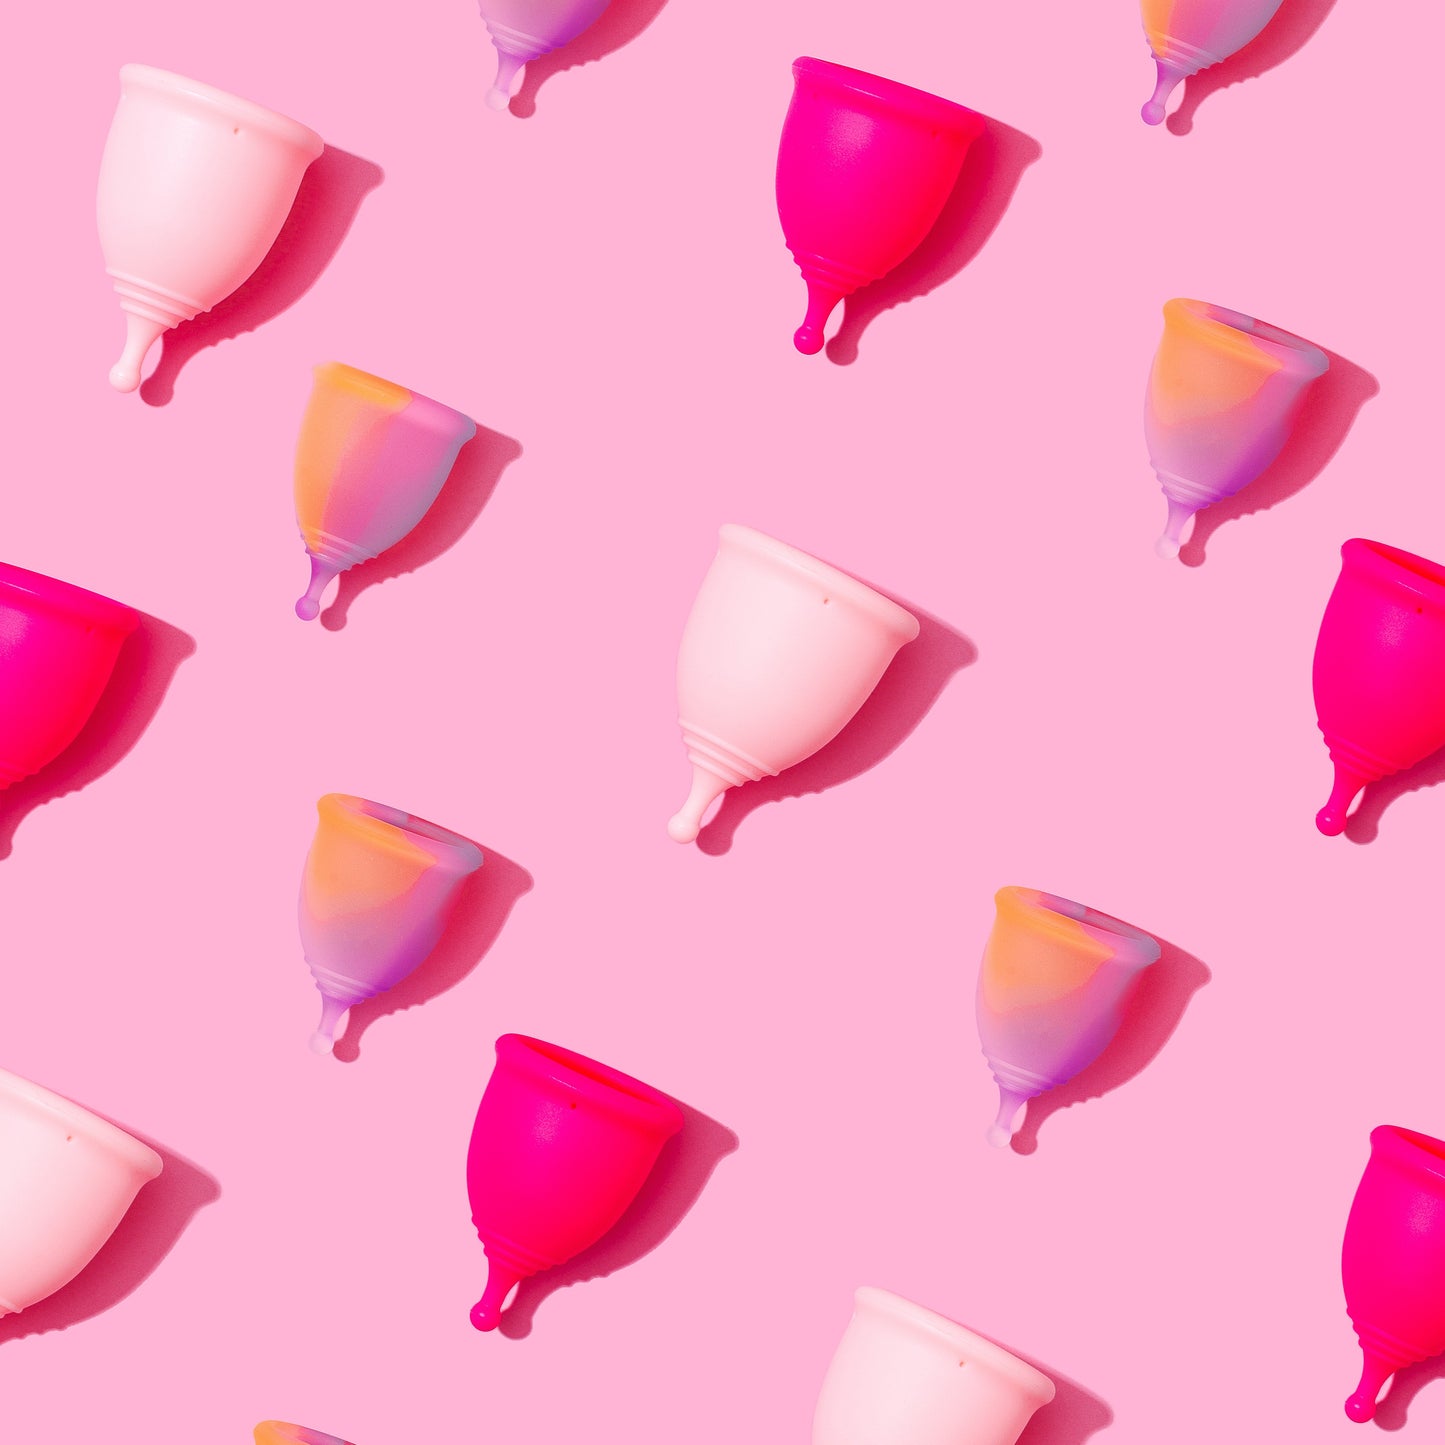 Small picmecup menstrual cup